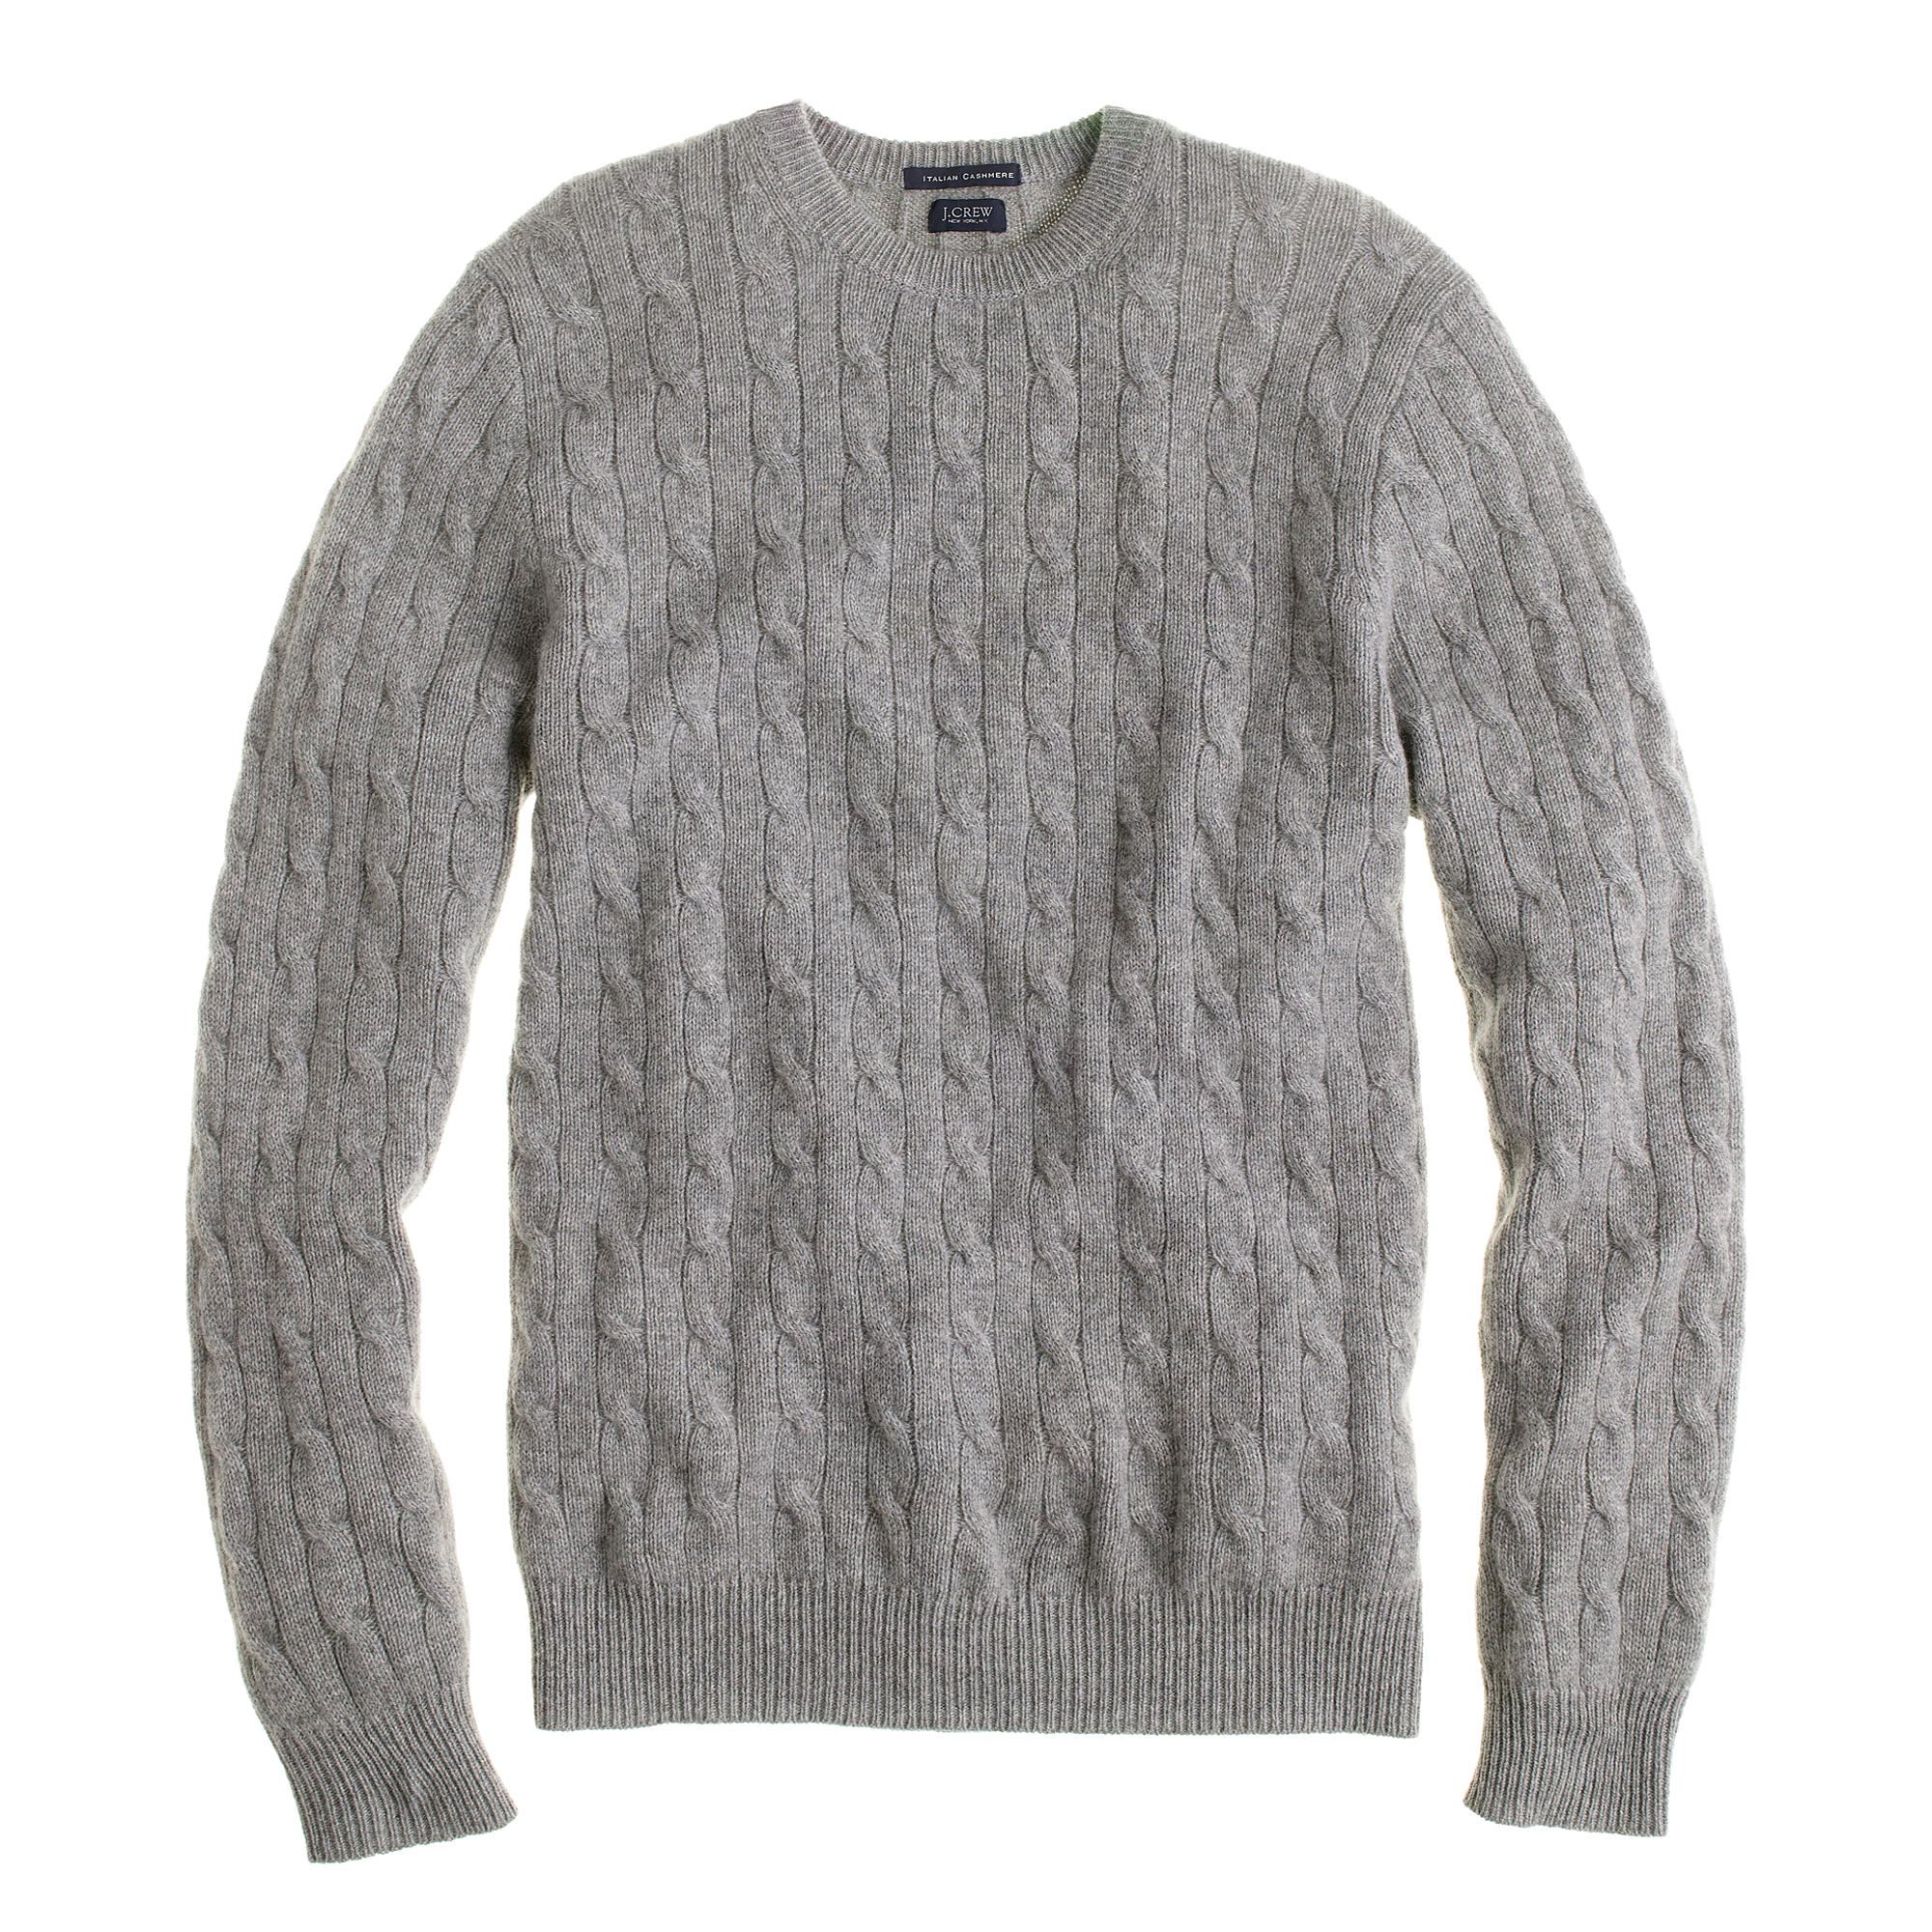 J.Crew Tall Italian Cashmere Cable Sweater in Gray for Men - Lyst